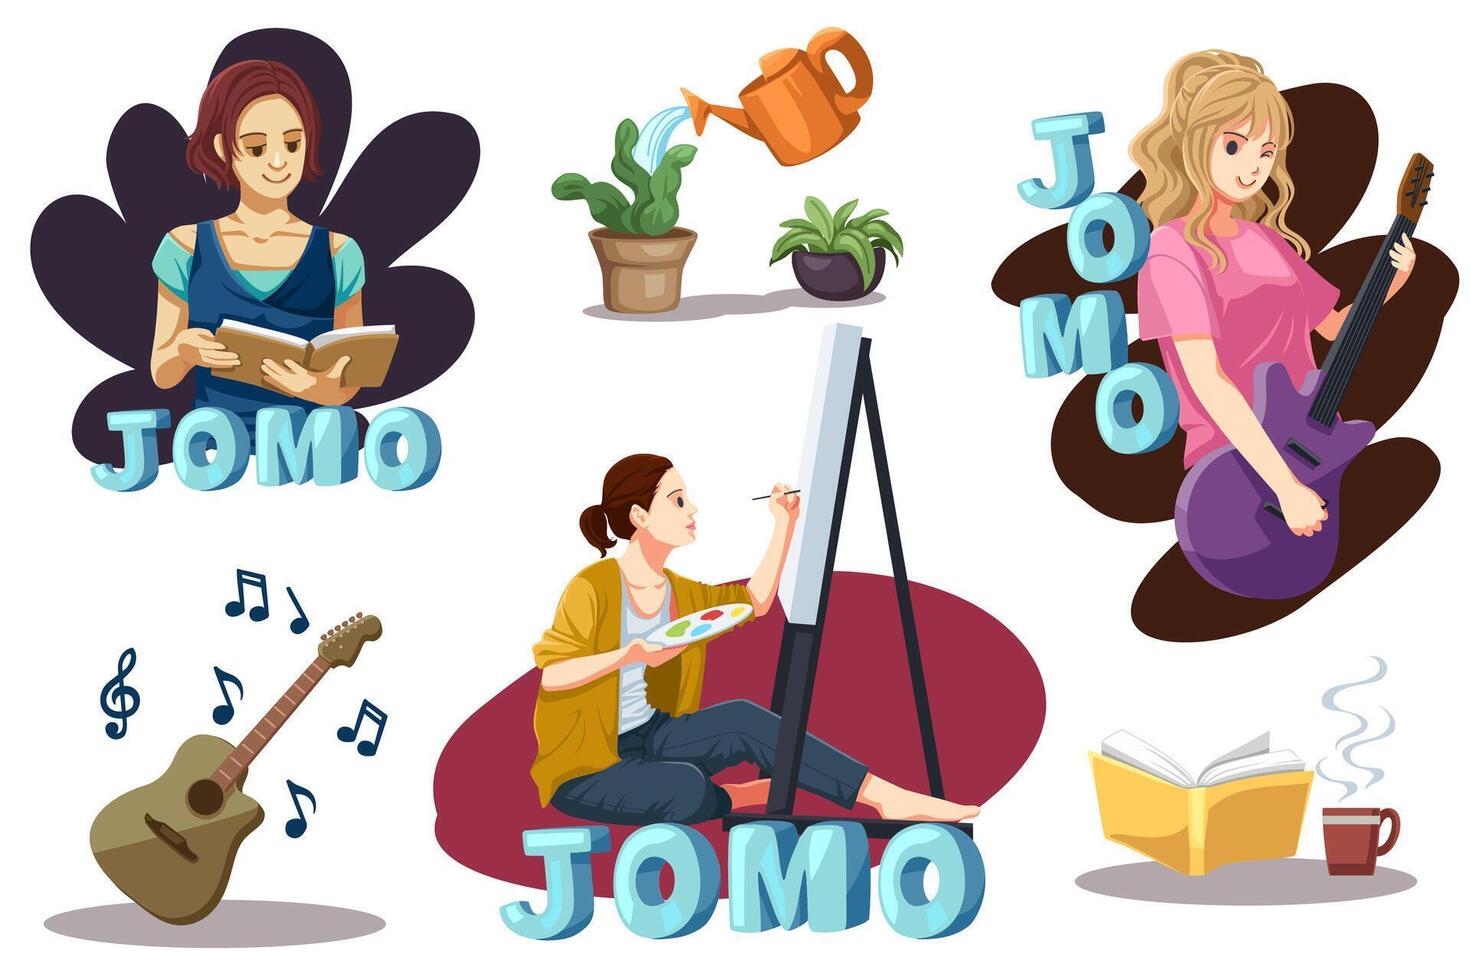 Fomo and Jomo concept. fear of missing out, joy of missing out vector